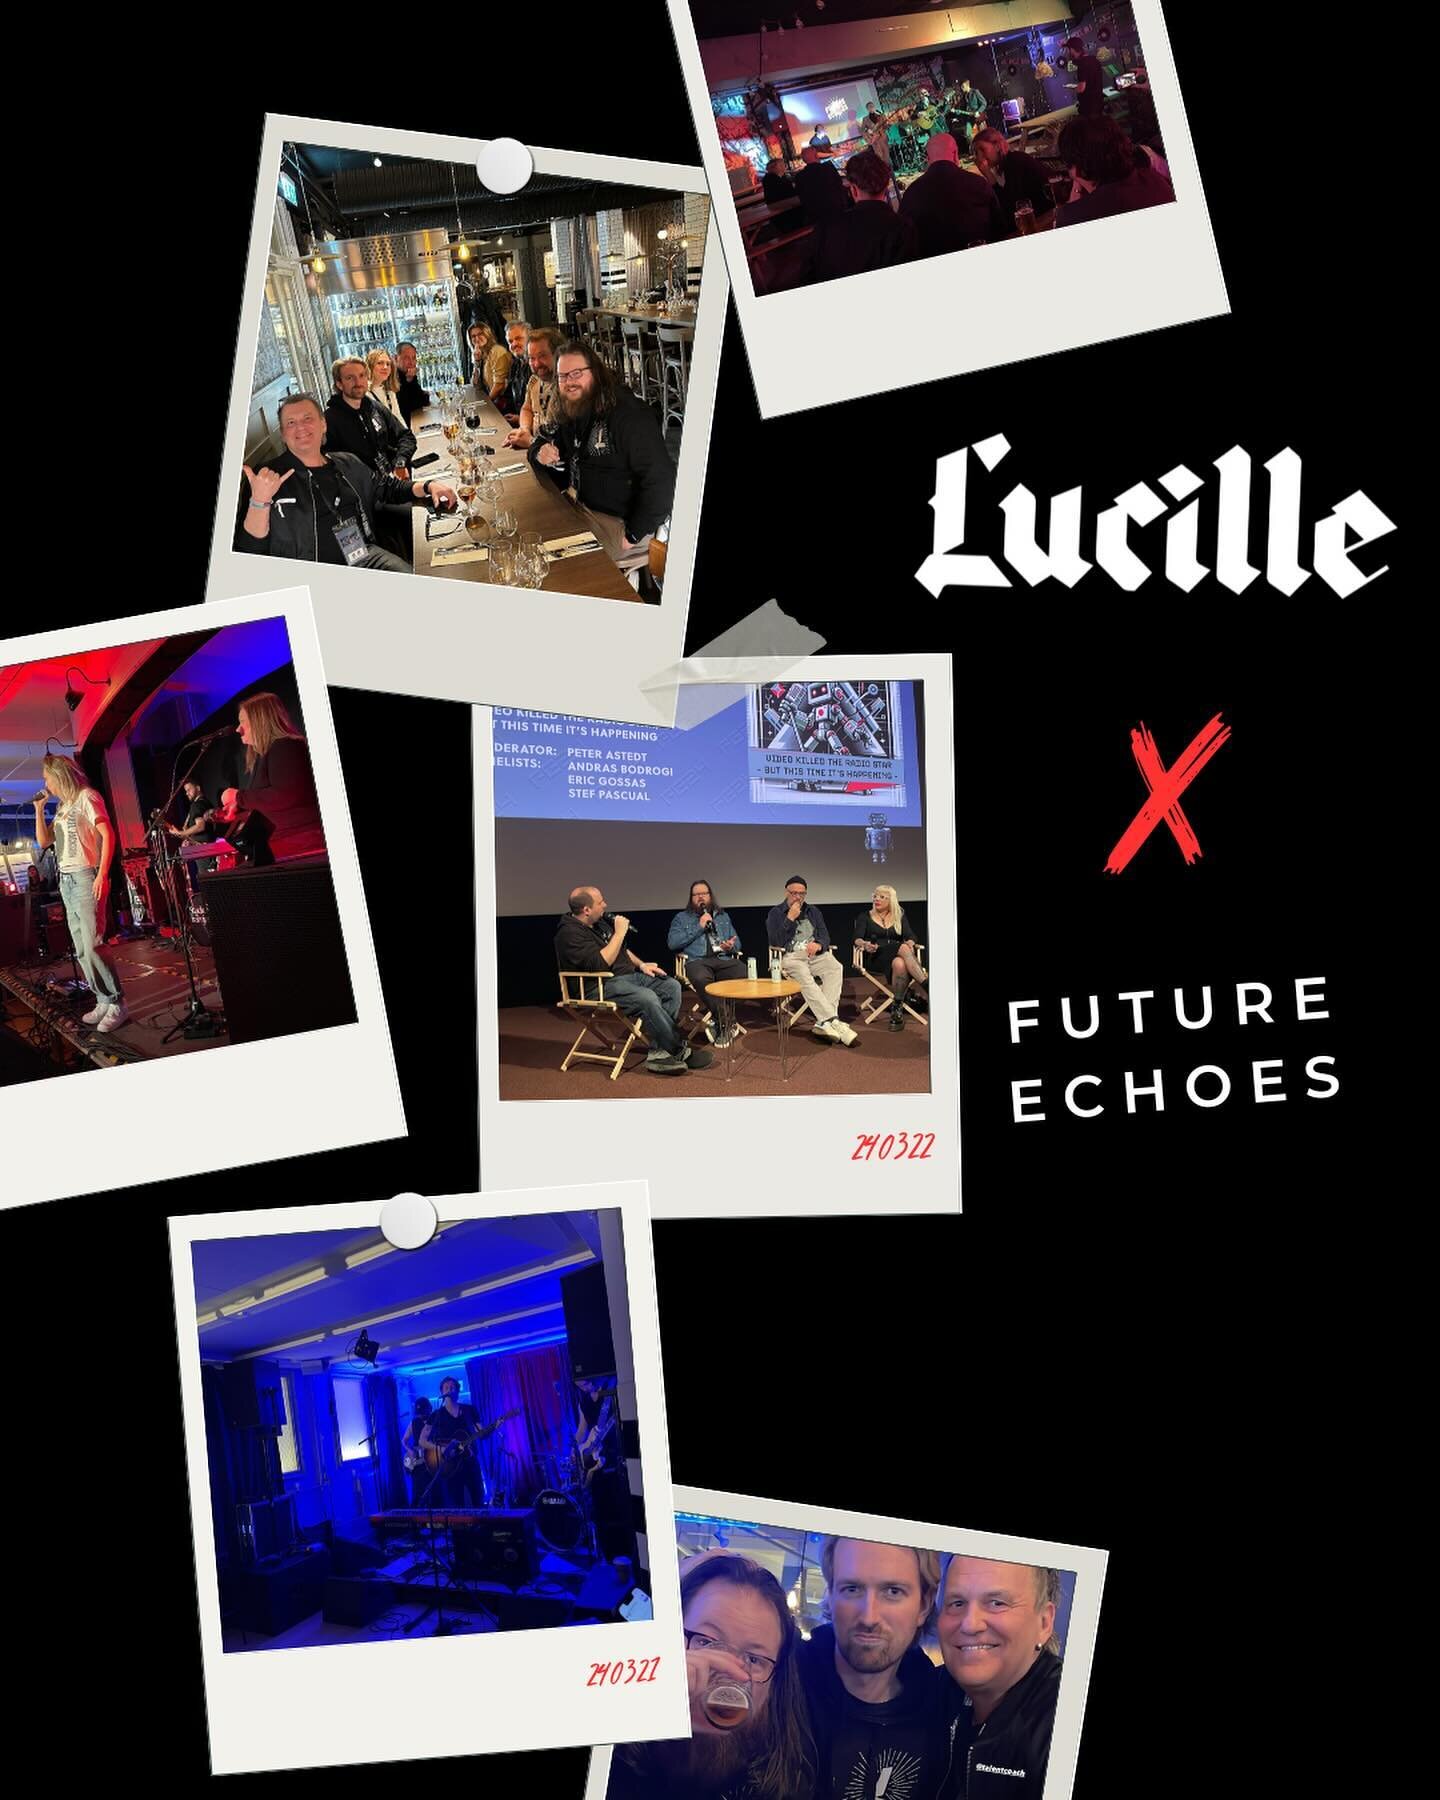 Some highlights from our wonderful weekend at Future Echoes! 

We had a blast meeting both new and old friends and talking about opportunities with potential future partners. Thank you @futureechoesfestival for a great festival, for having us in one 